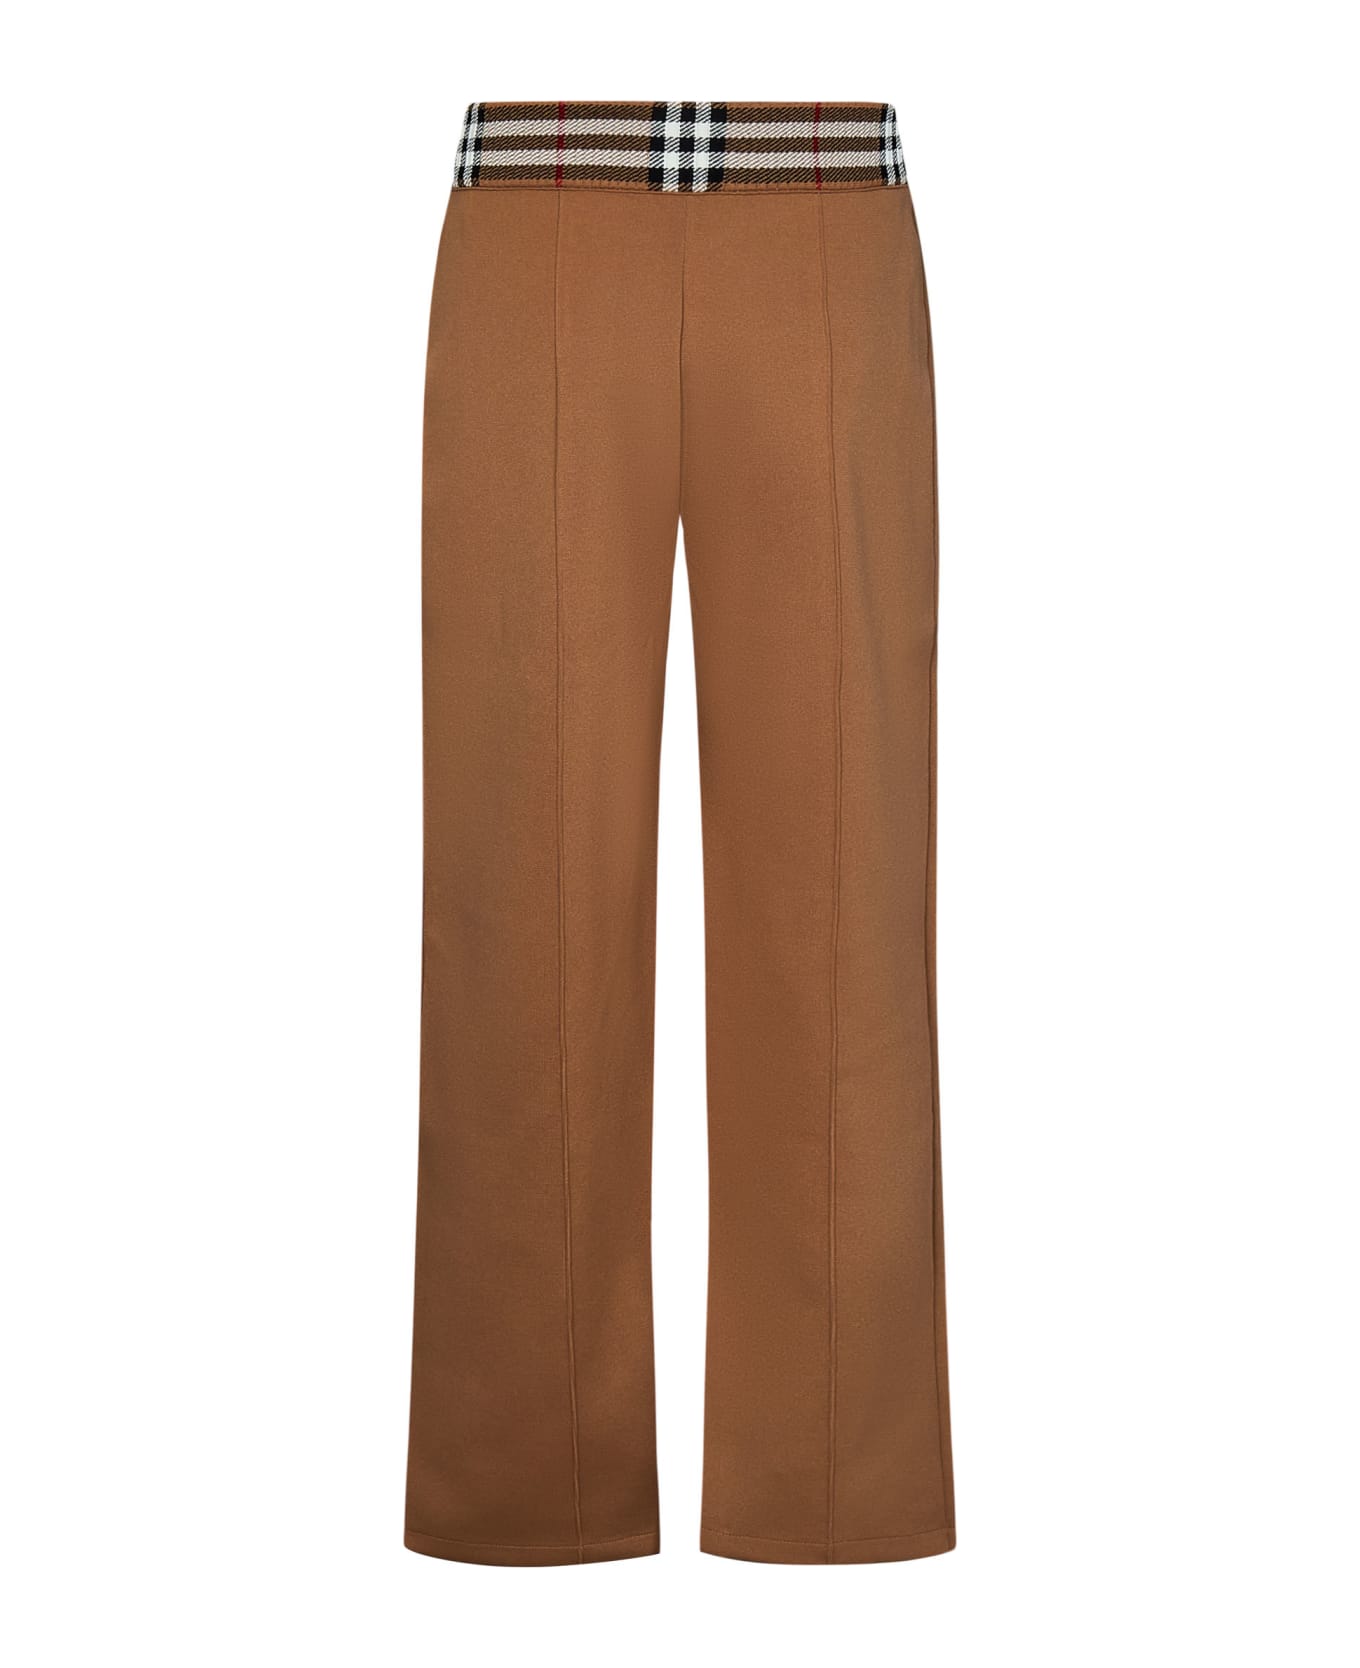 Burberry Trousers - Beige